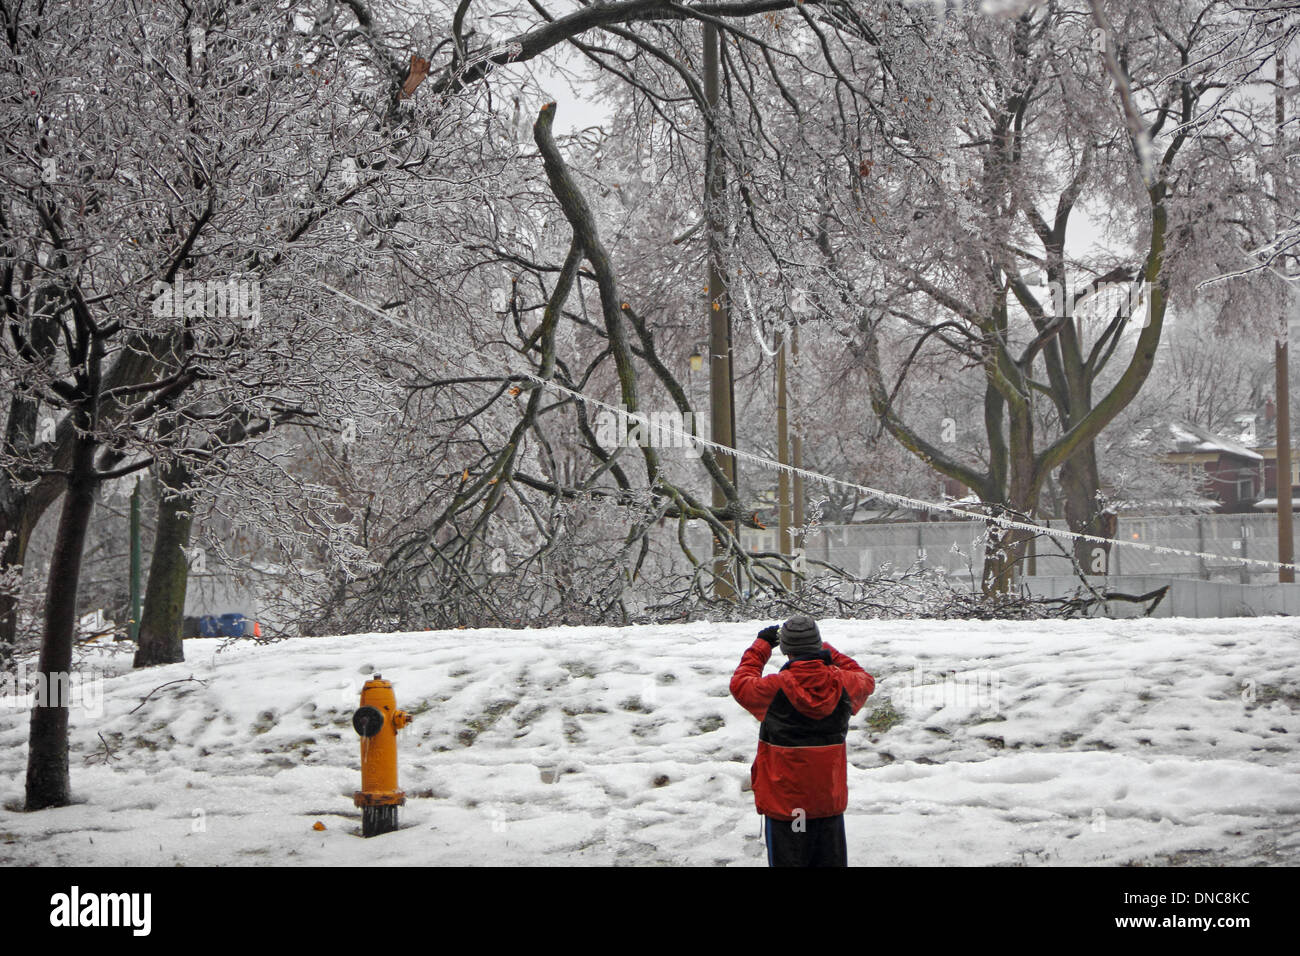 Toronto, Canada. 22nd Dec, 2013. Major Ice Storm and freezing rain caused damages to power lines and trees in Davisville Park in midtown Toronto. An unknown man is taking photographs. Credit:  CharlineXia/Alamy Live News Stock Photo